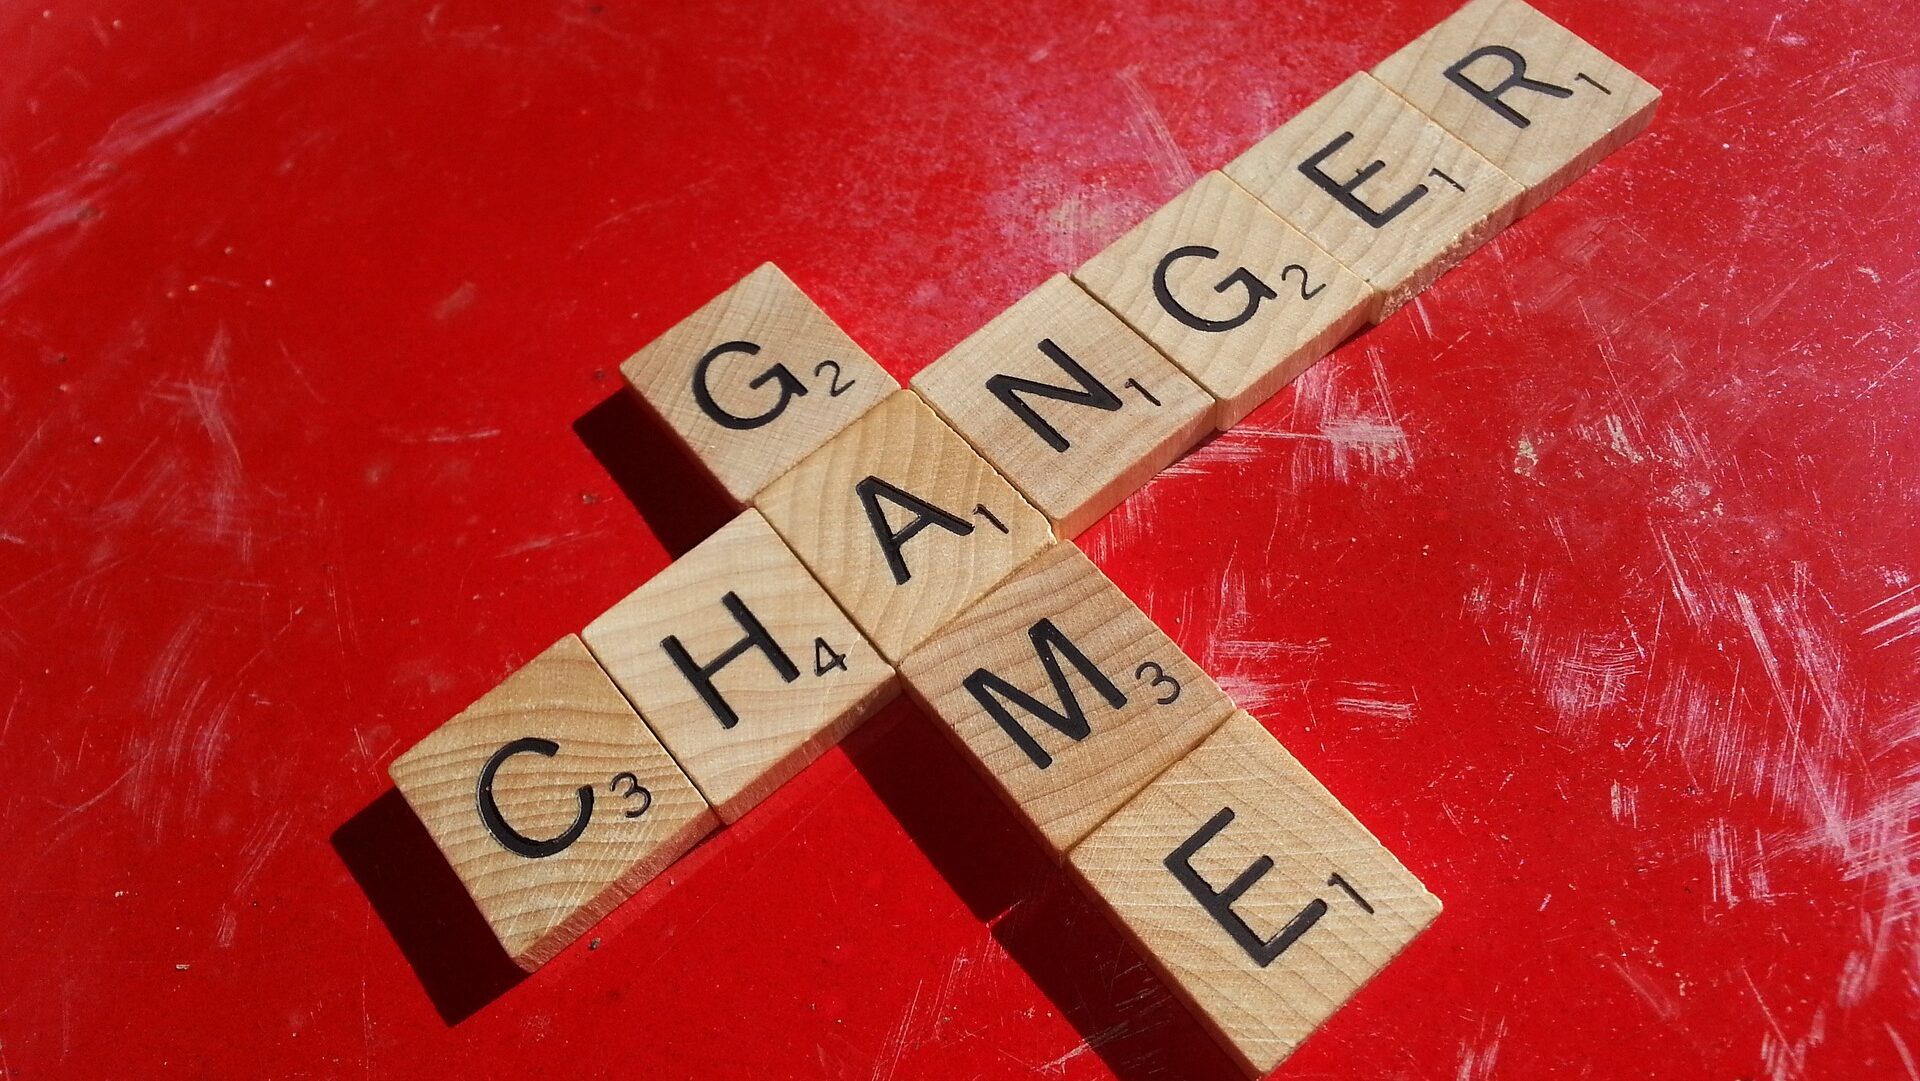 Scrabble letters spelling "Game changer" in a perpendicular pattern sharing the letter A, on a red background.